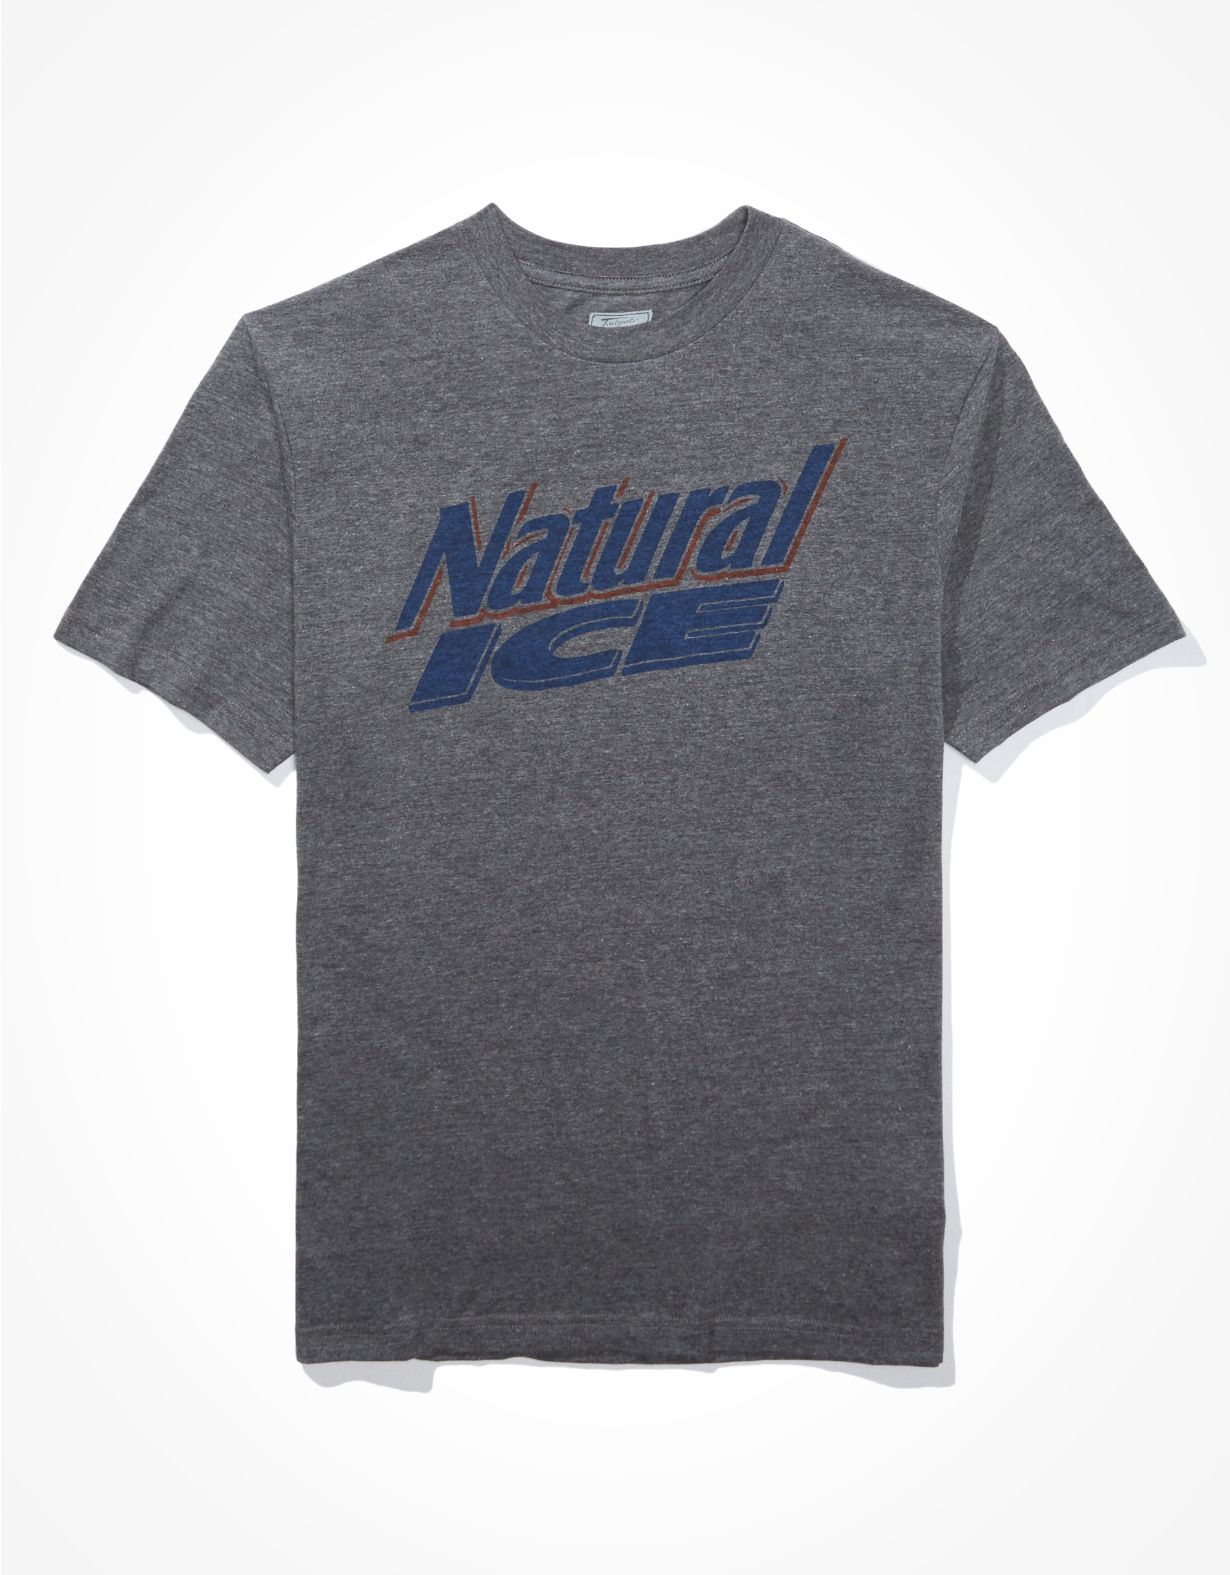 Tailgate Men's Natural Ice Graphic T-Shirt